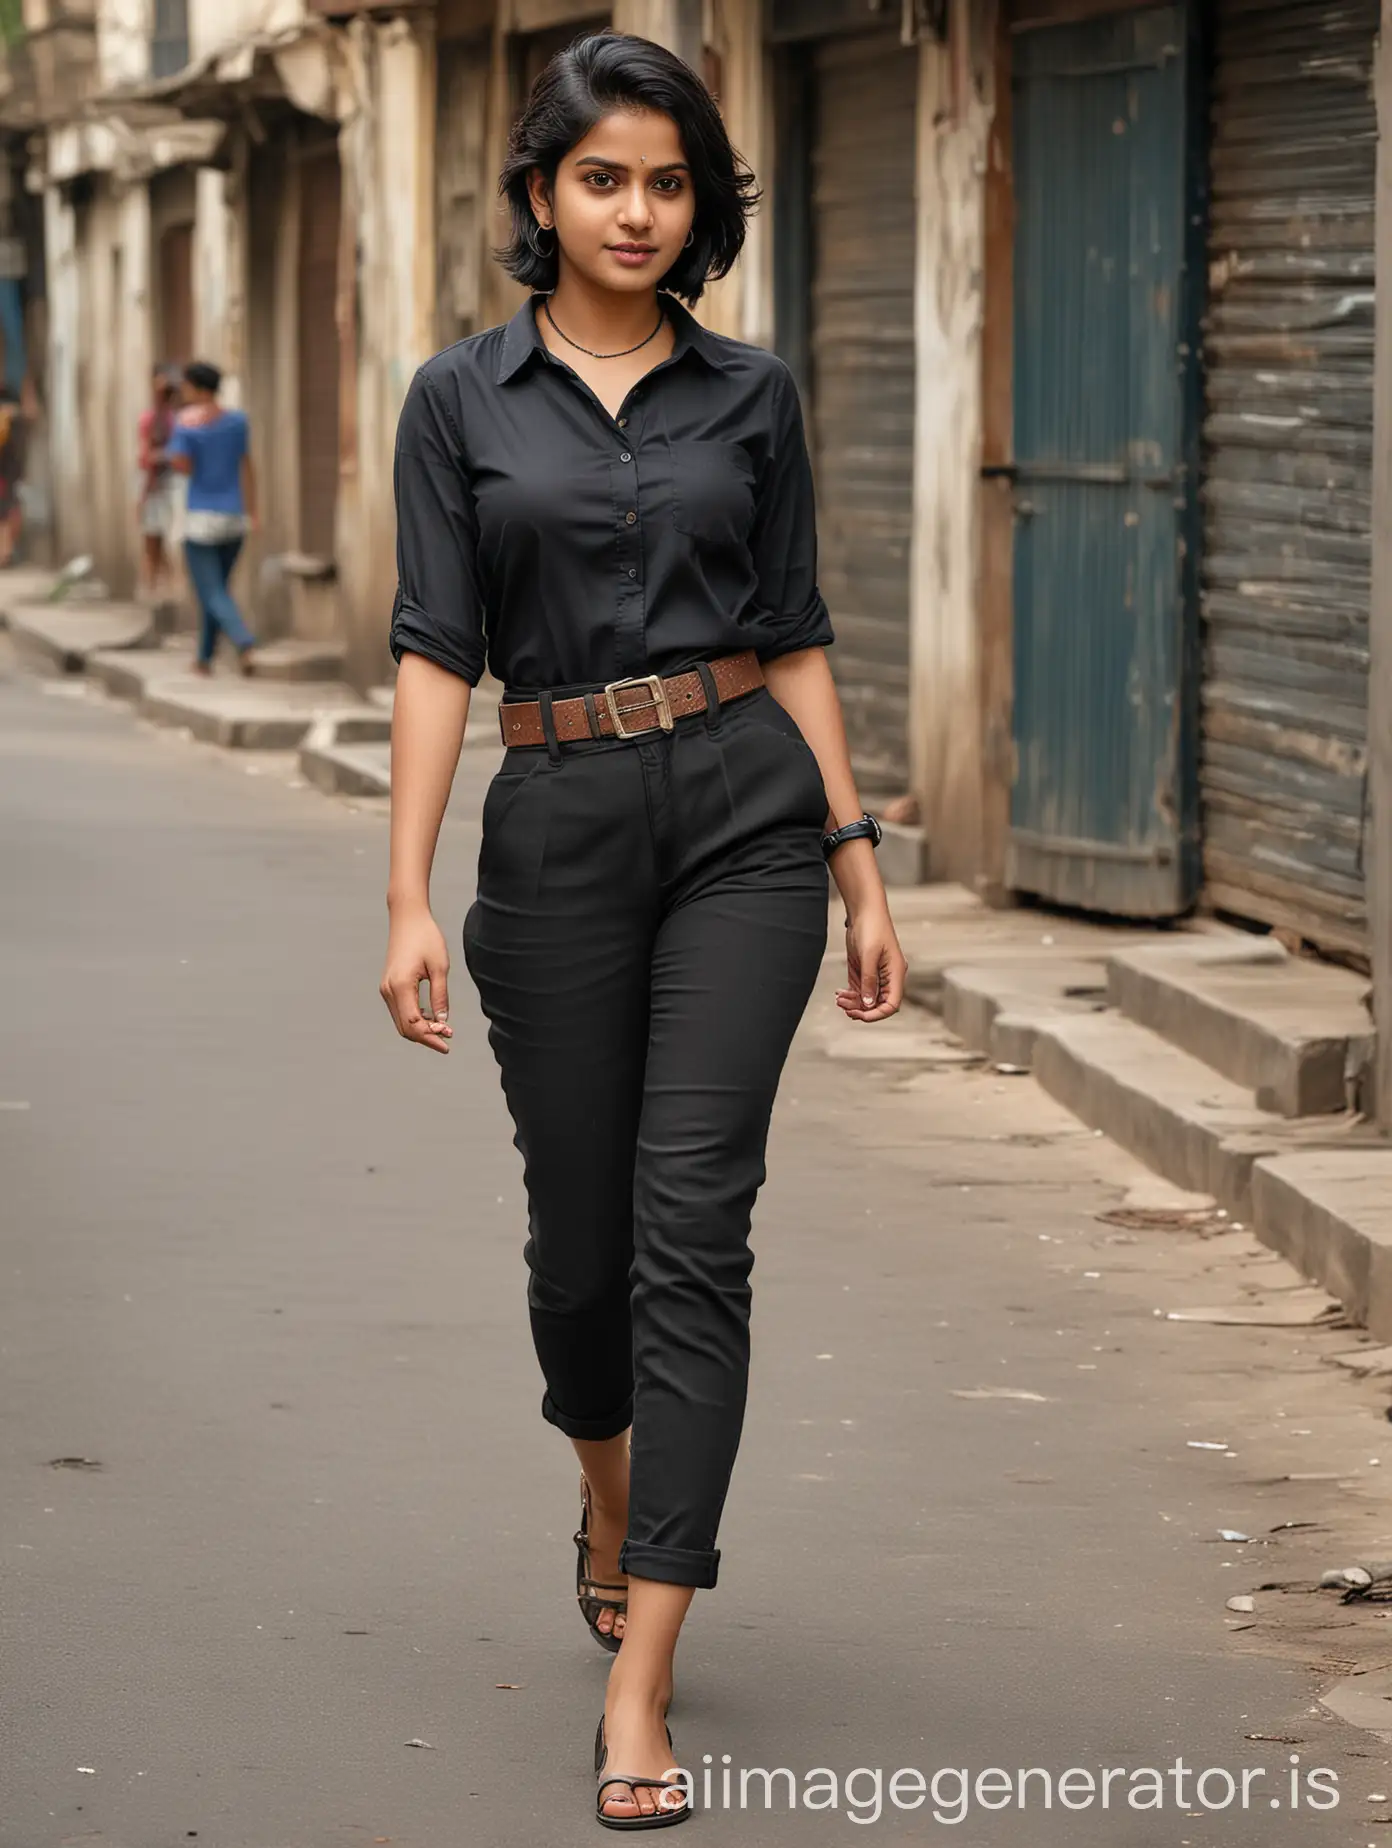 Indian women aged 20 to 25 years. short haircut wearing There is a belt on the waist , Nupur has feet, watches, waist belts and black shirts and black pants, two earrings in their ears, walking on the street. ,Smartphone Photography, Ultra Realistic, Aperture F 2.5, Golden Ratio.